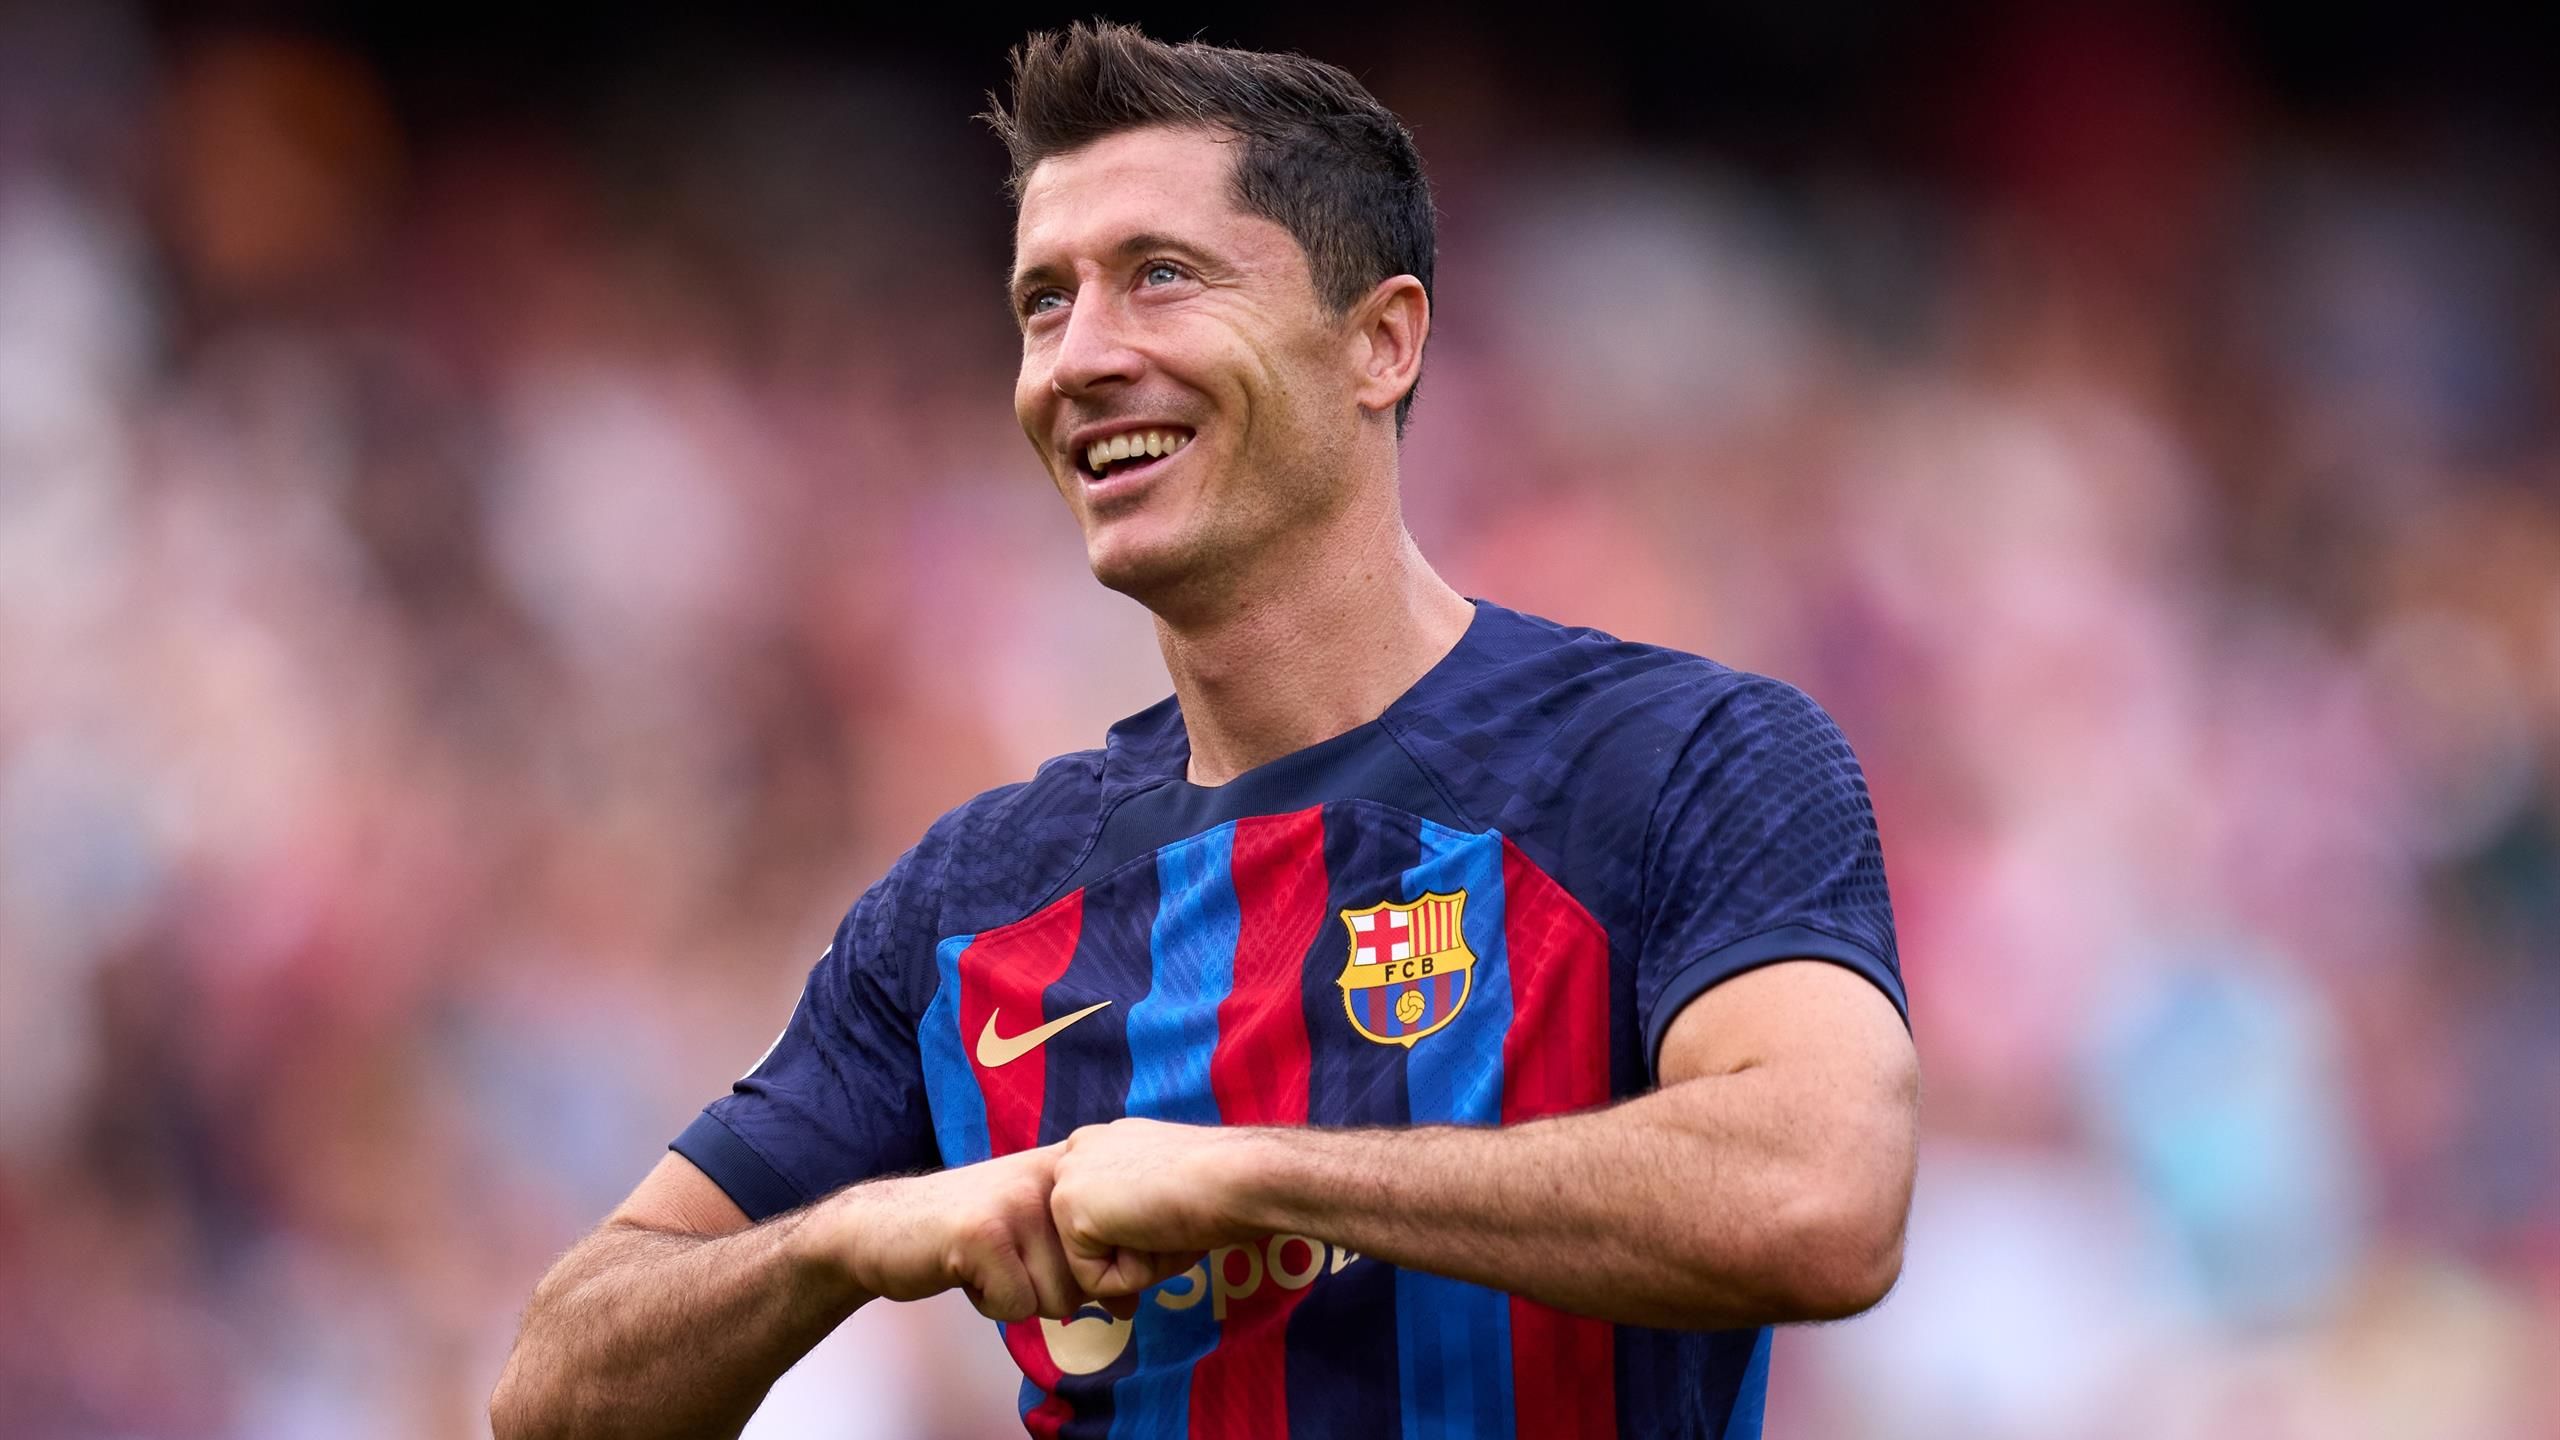 Robert Lewandowski Age, Salary, Net worth, Current Teams, Career, Height, and much more